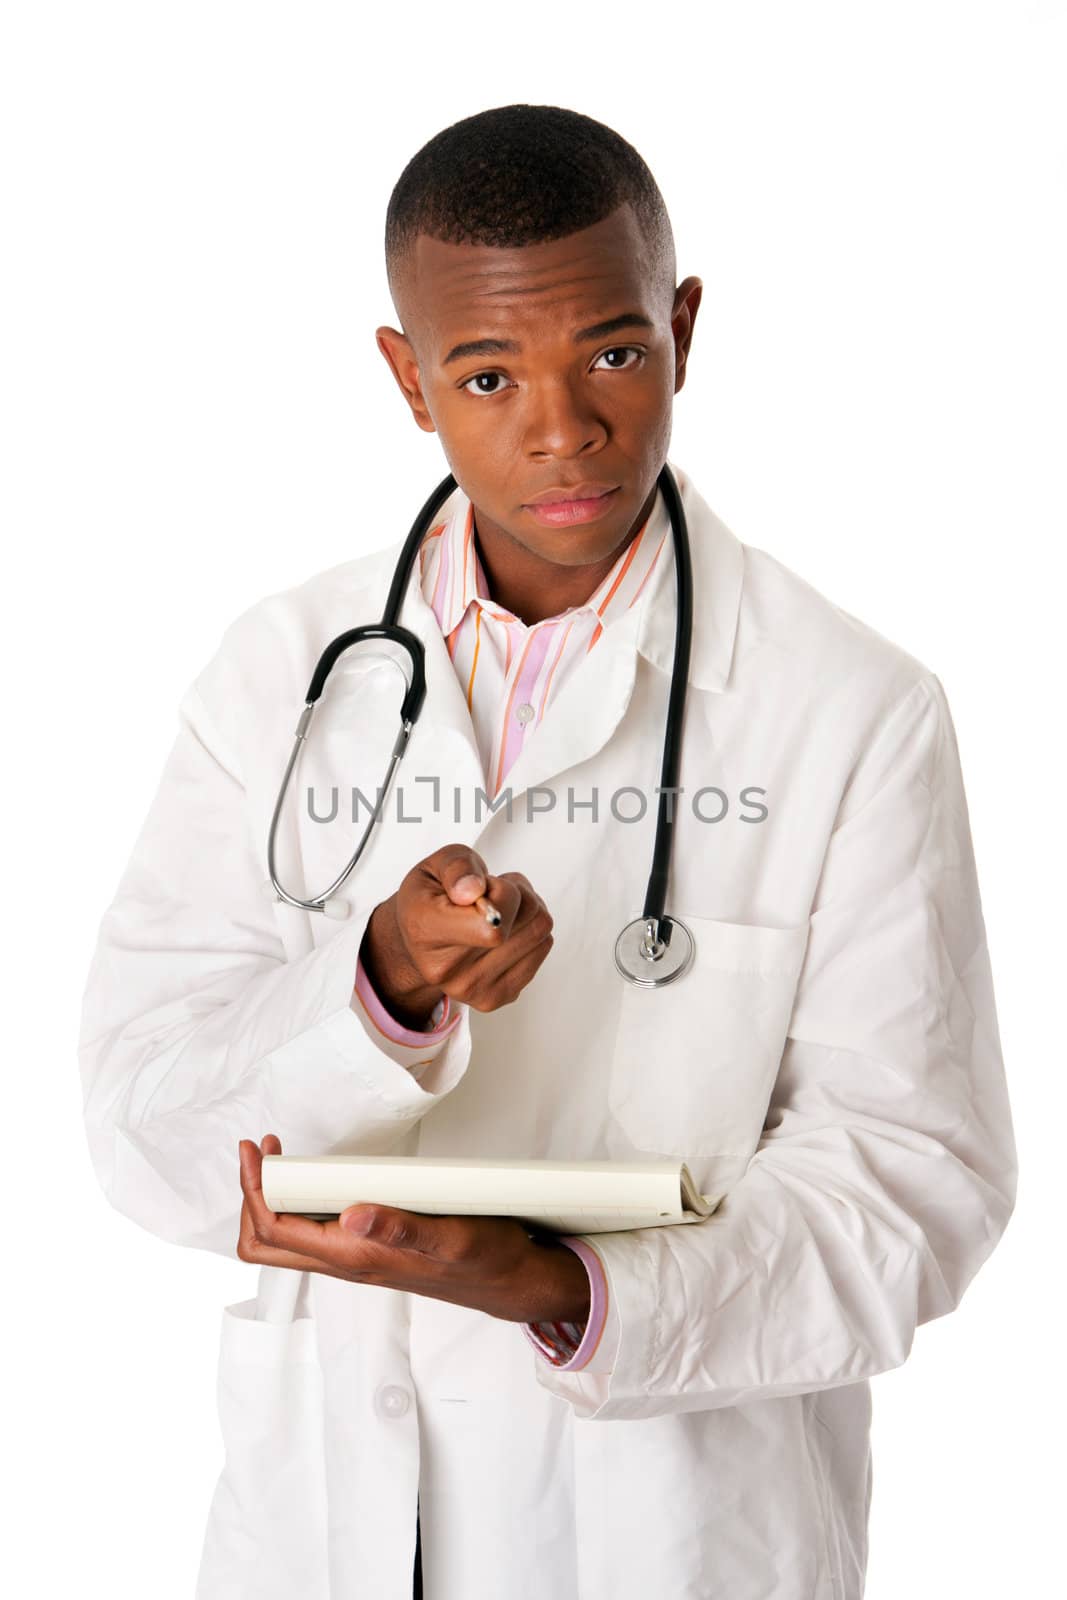 Handsome Doctor physician with patient chart dossier and stethoscope asking and confirming questions, taking note, isolated.